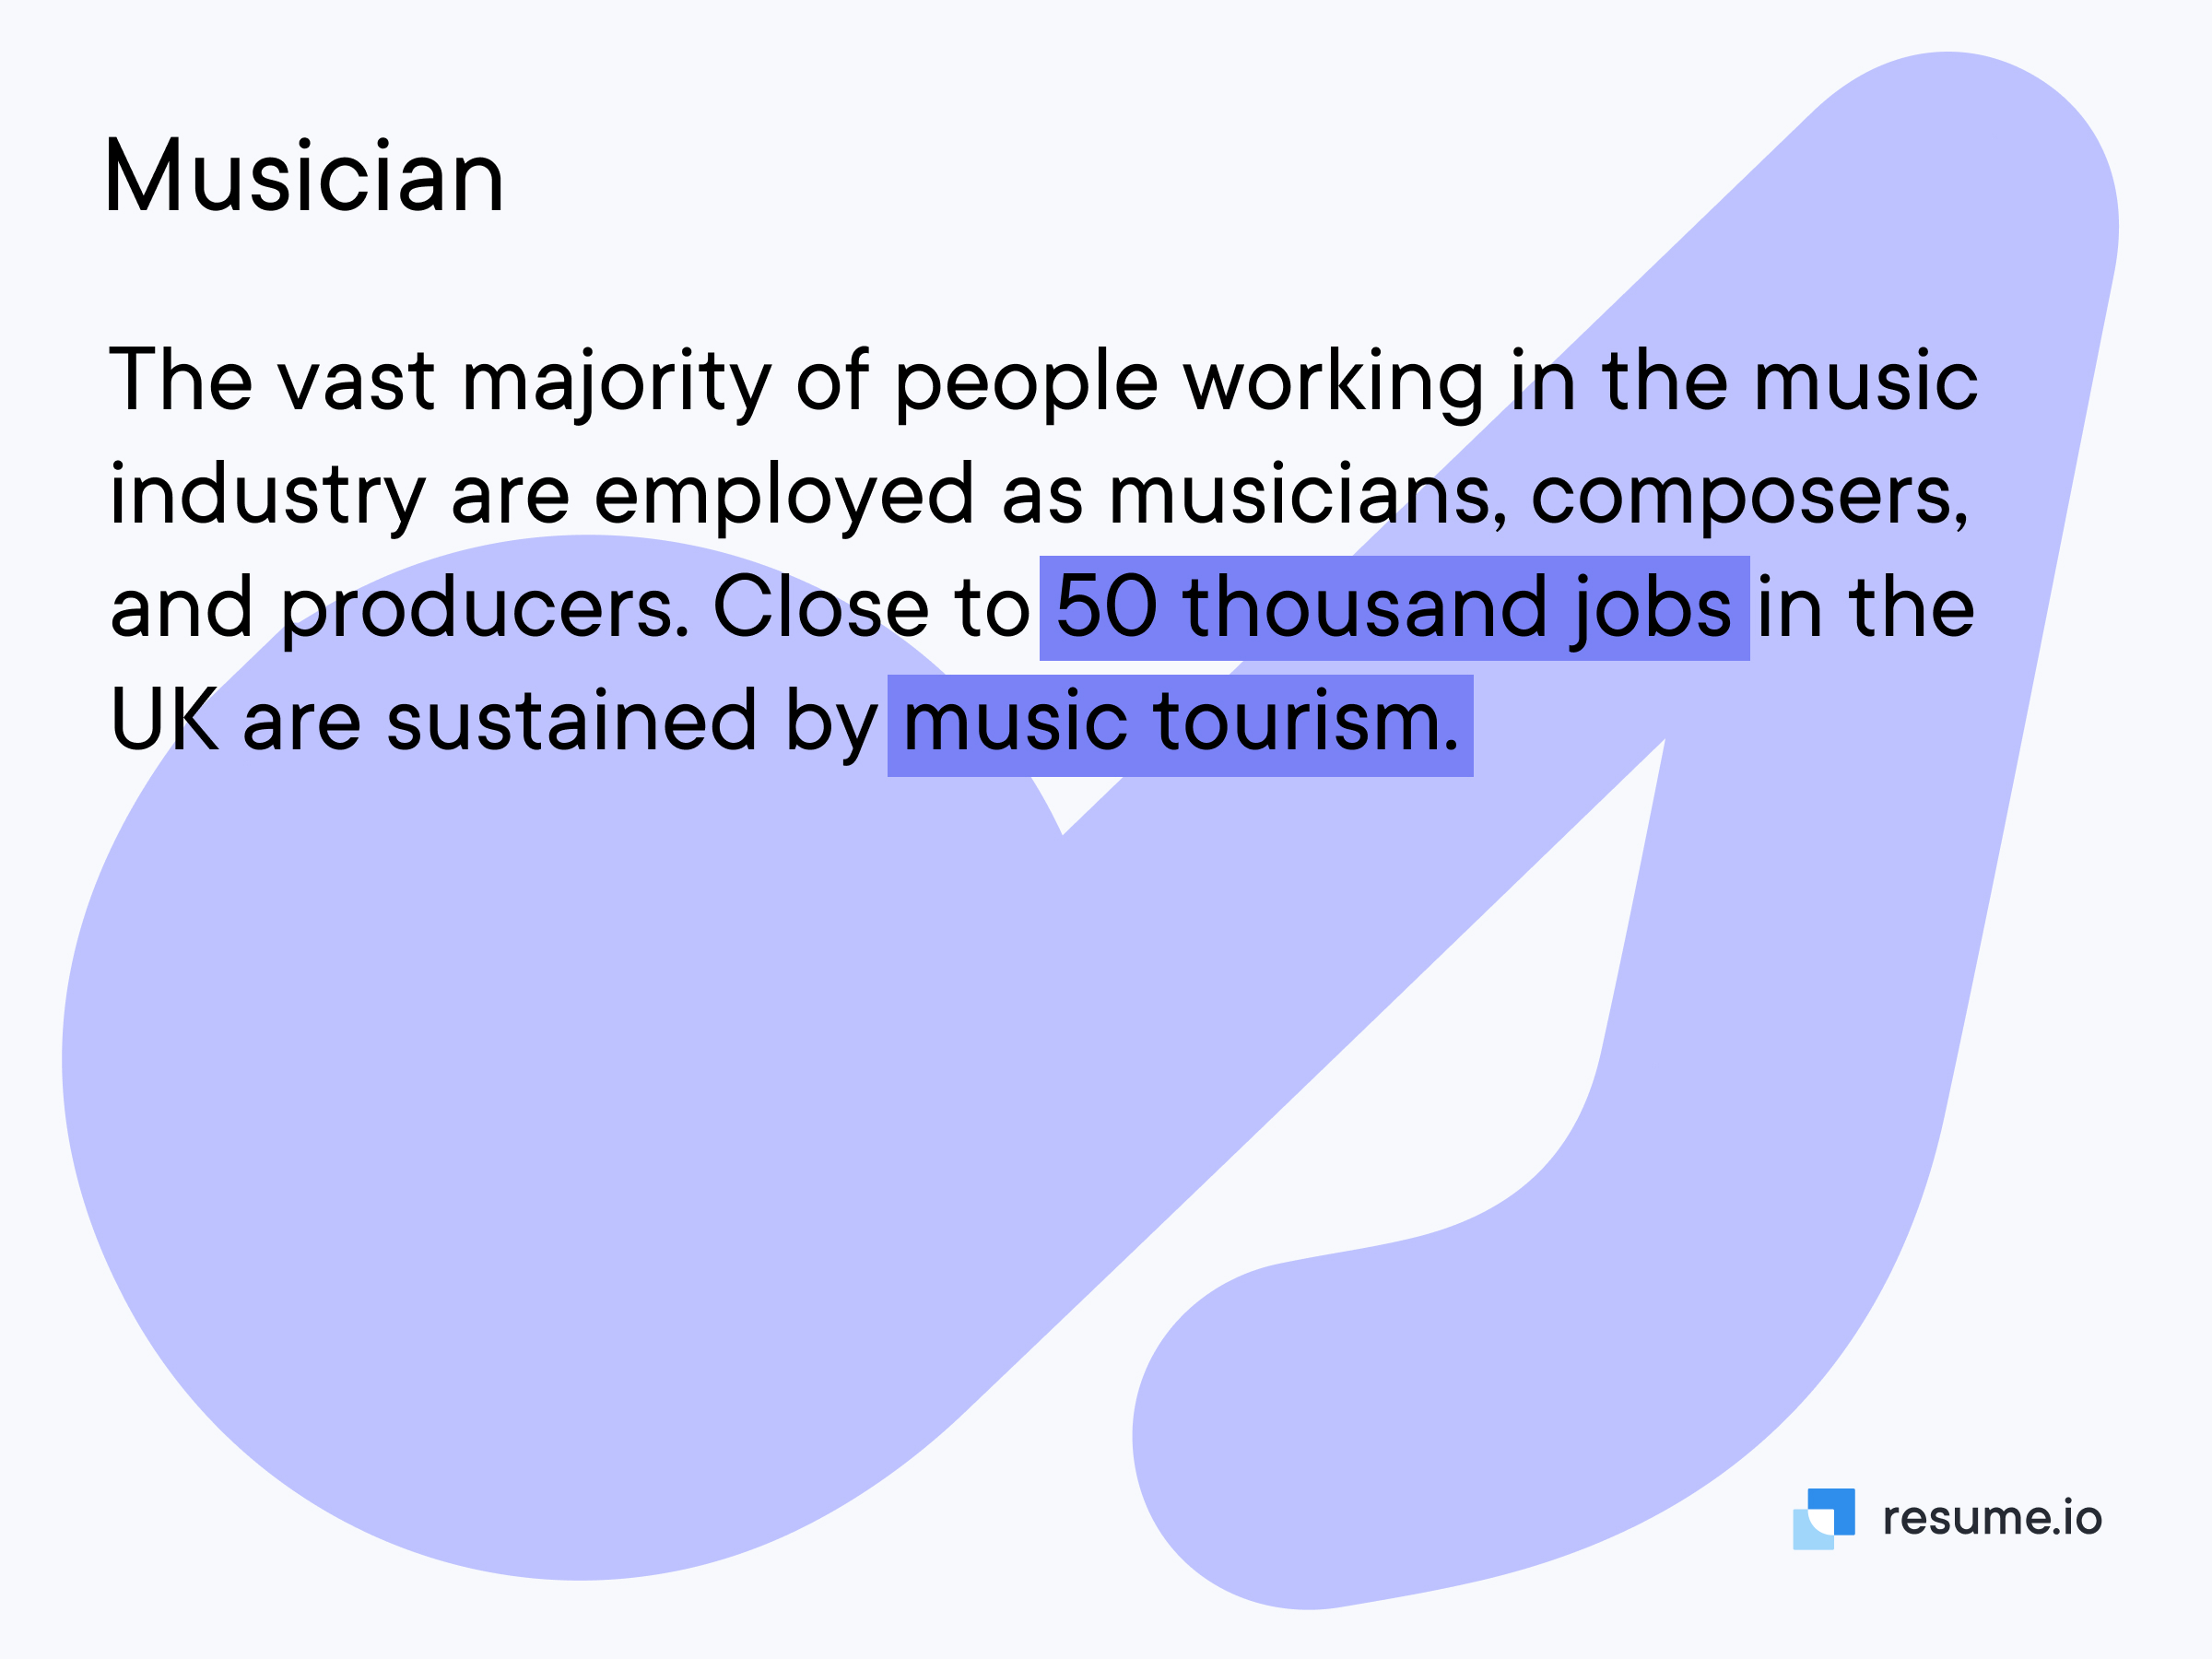 Vast majority of people working in the music industry are musicians, composers, and producers